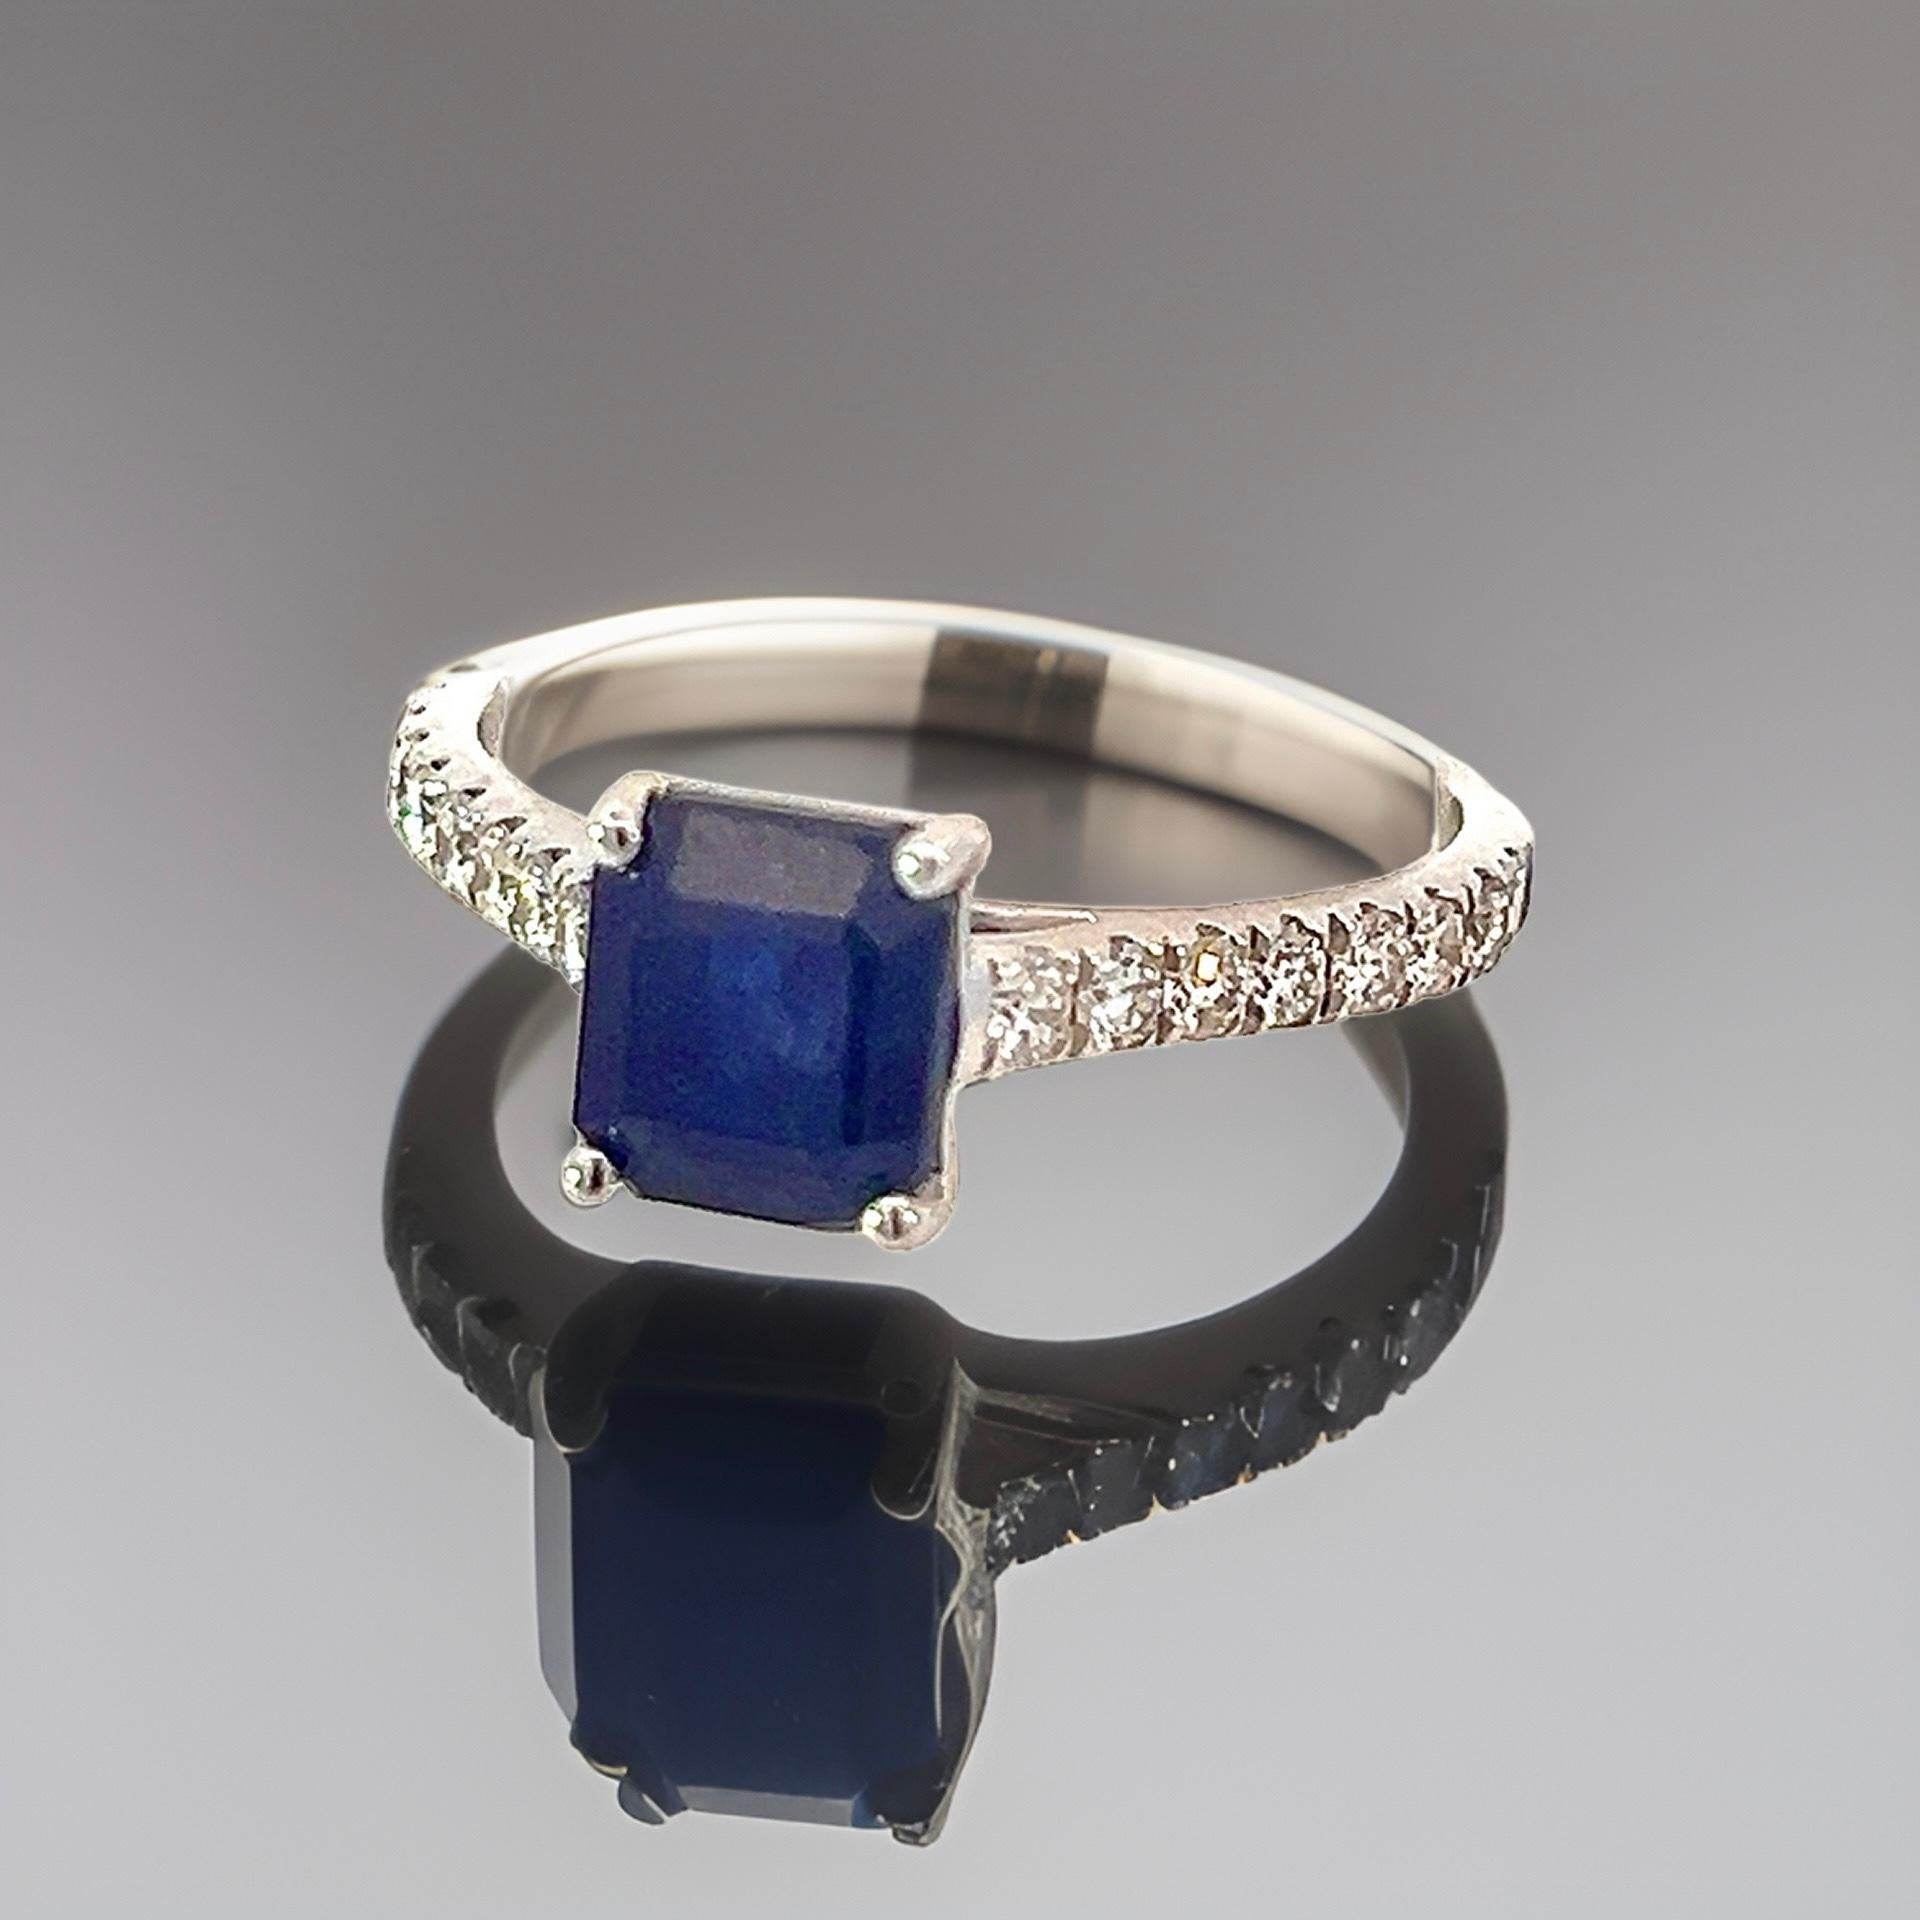 Natural Sapphire Diamond Ring 6.5 14k White Gold 2.17 TCW Certified 8